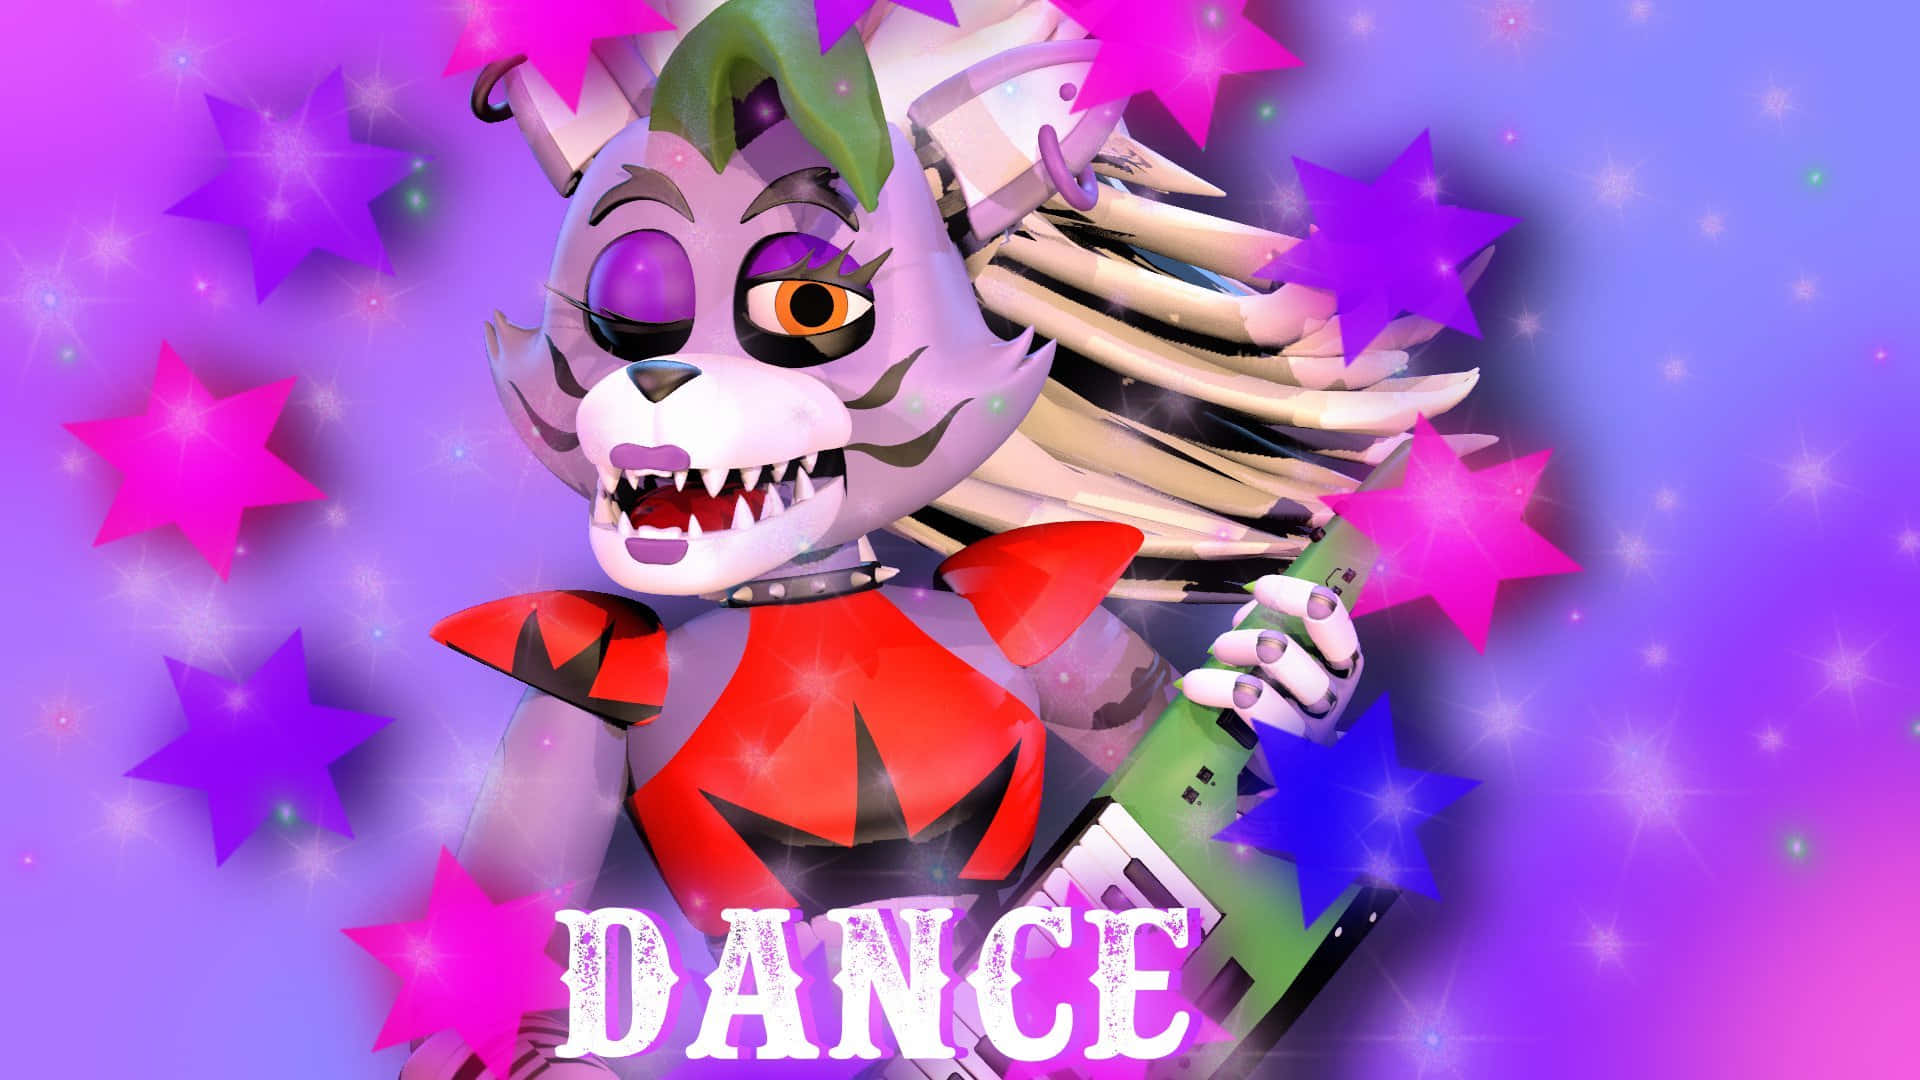 Stream FNAF Roxanne Wolf music  Listen to songs albums playlists for  free on SoundCloud